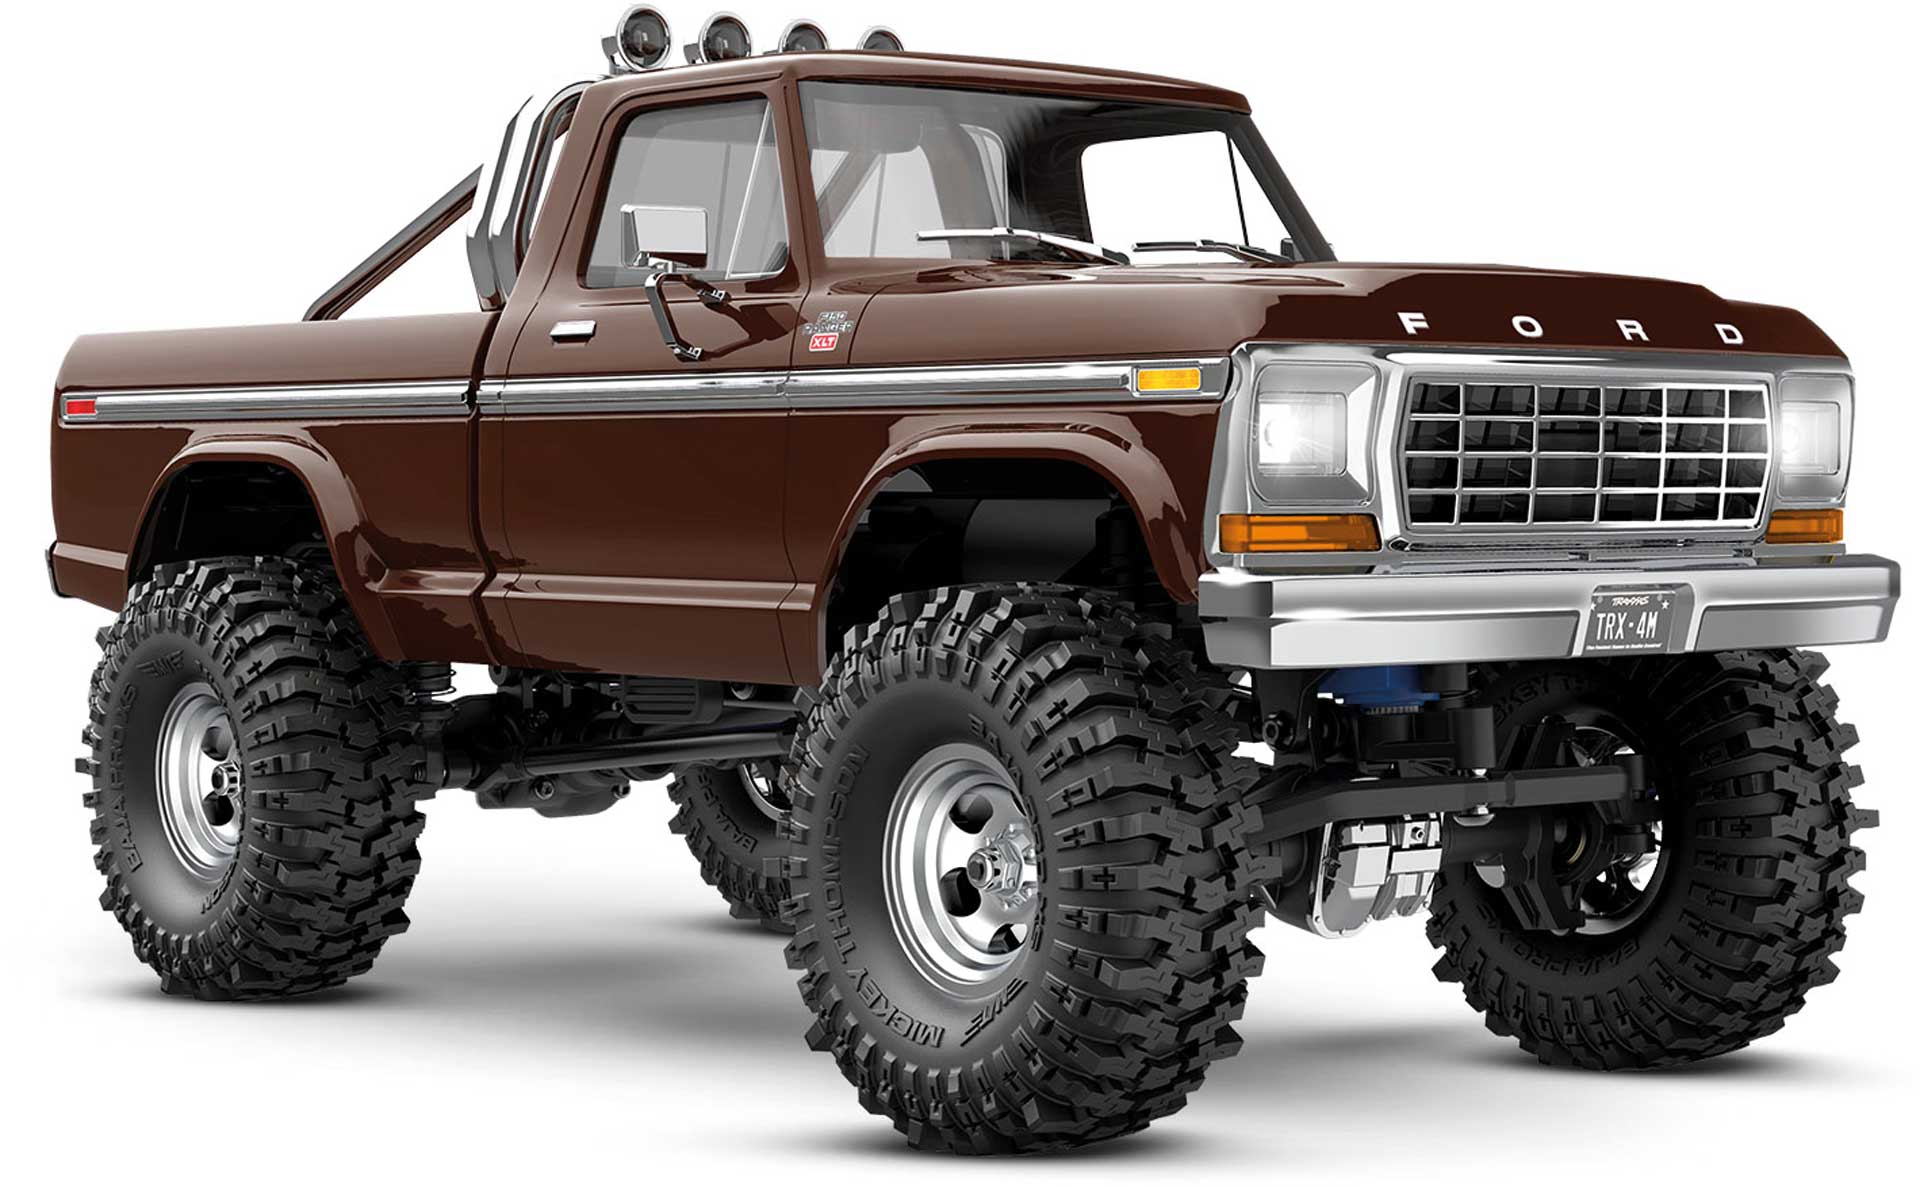 TRAXXAS TRX-4M FORD F150 4X4 LIFTED BROWN 1/18 CRAWLER RTR BRUSHED, WITH BATTERY AND USB CHARGER